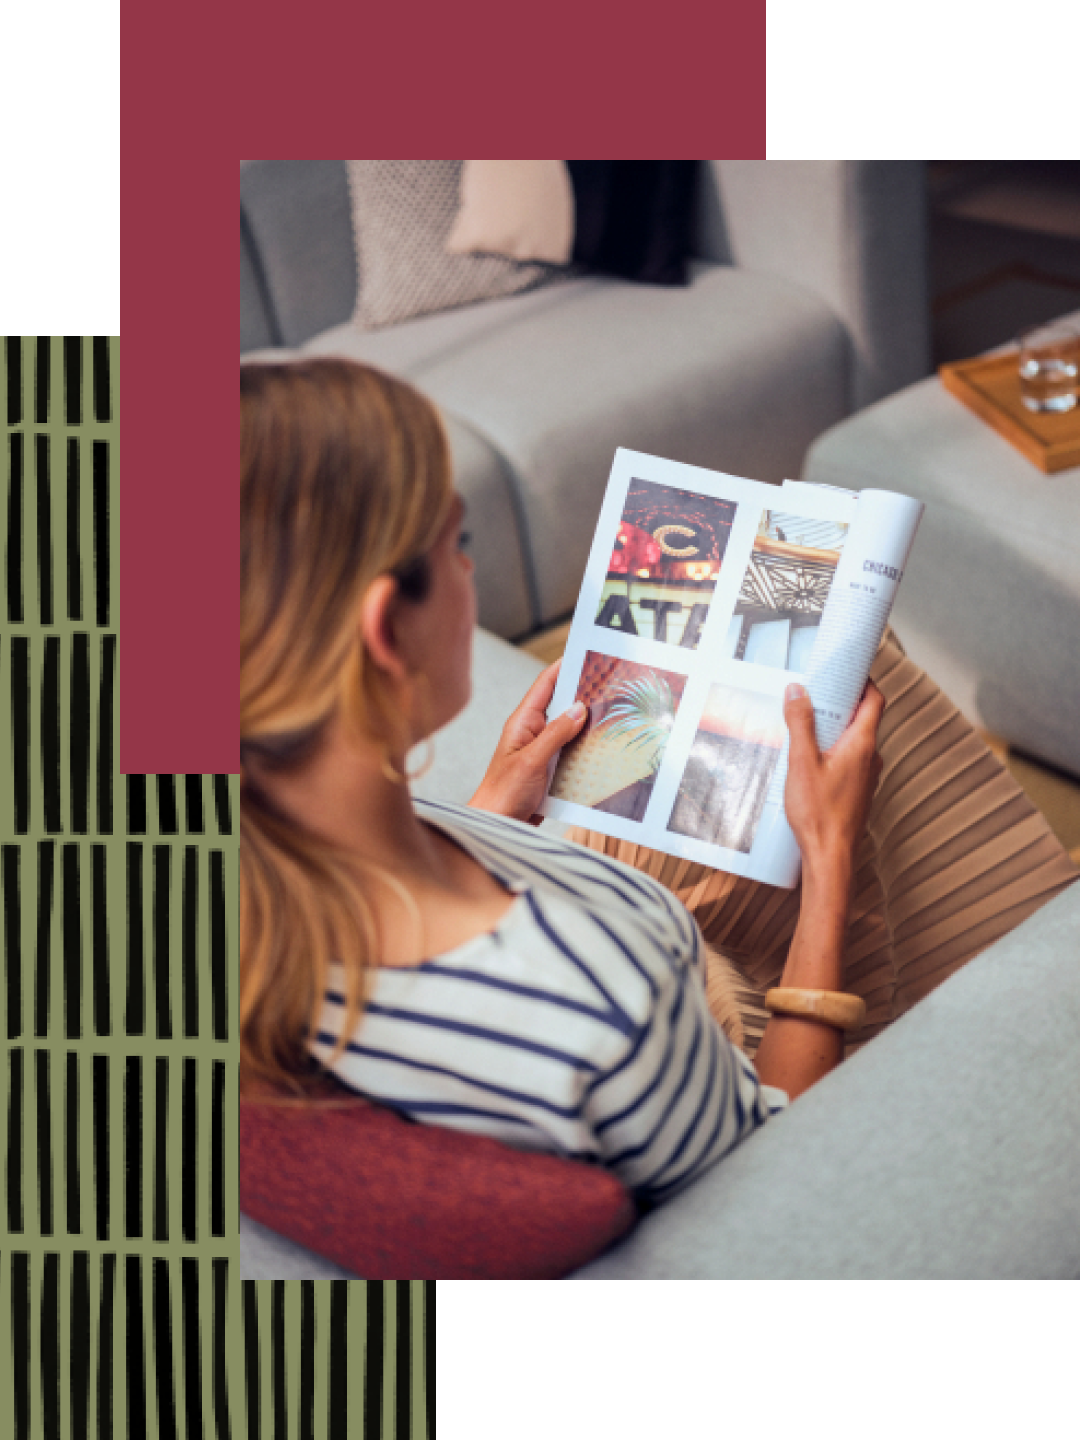 A woman wearing a striped shirt and a cool, chunky bracelet reads a magazine while relaxing on her hotel room couch.